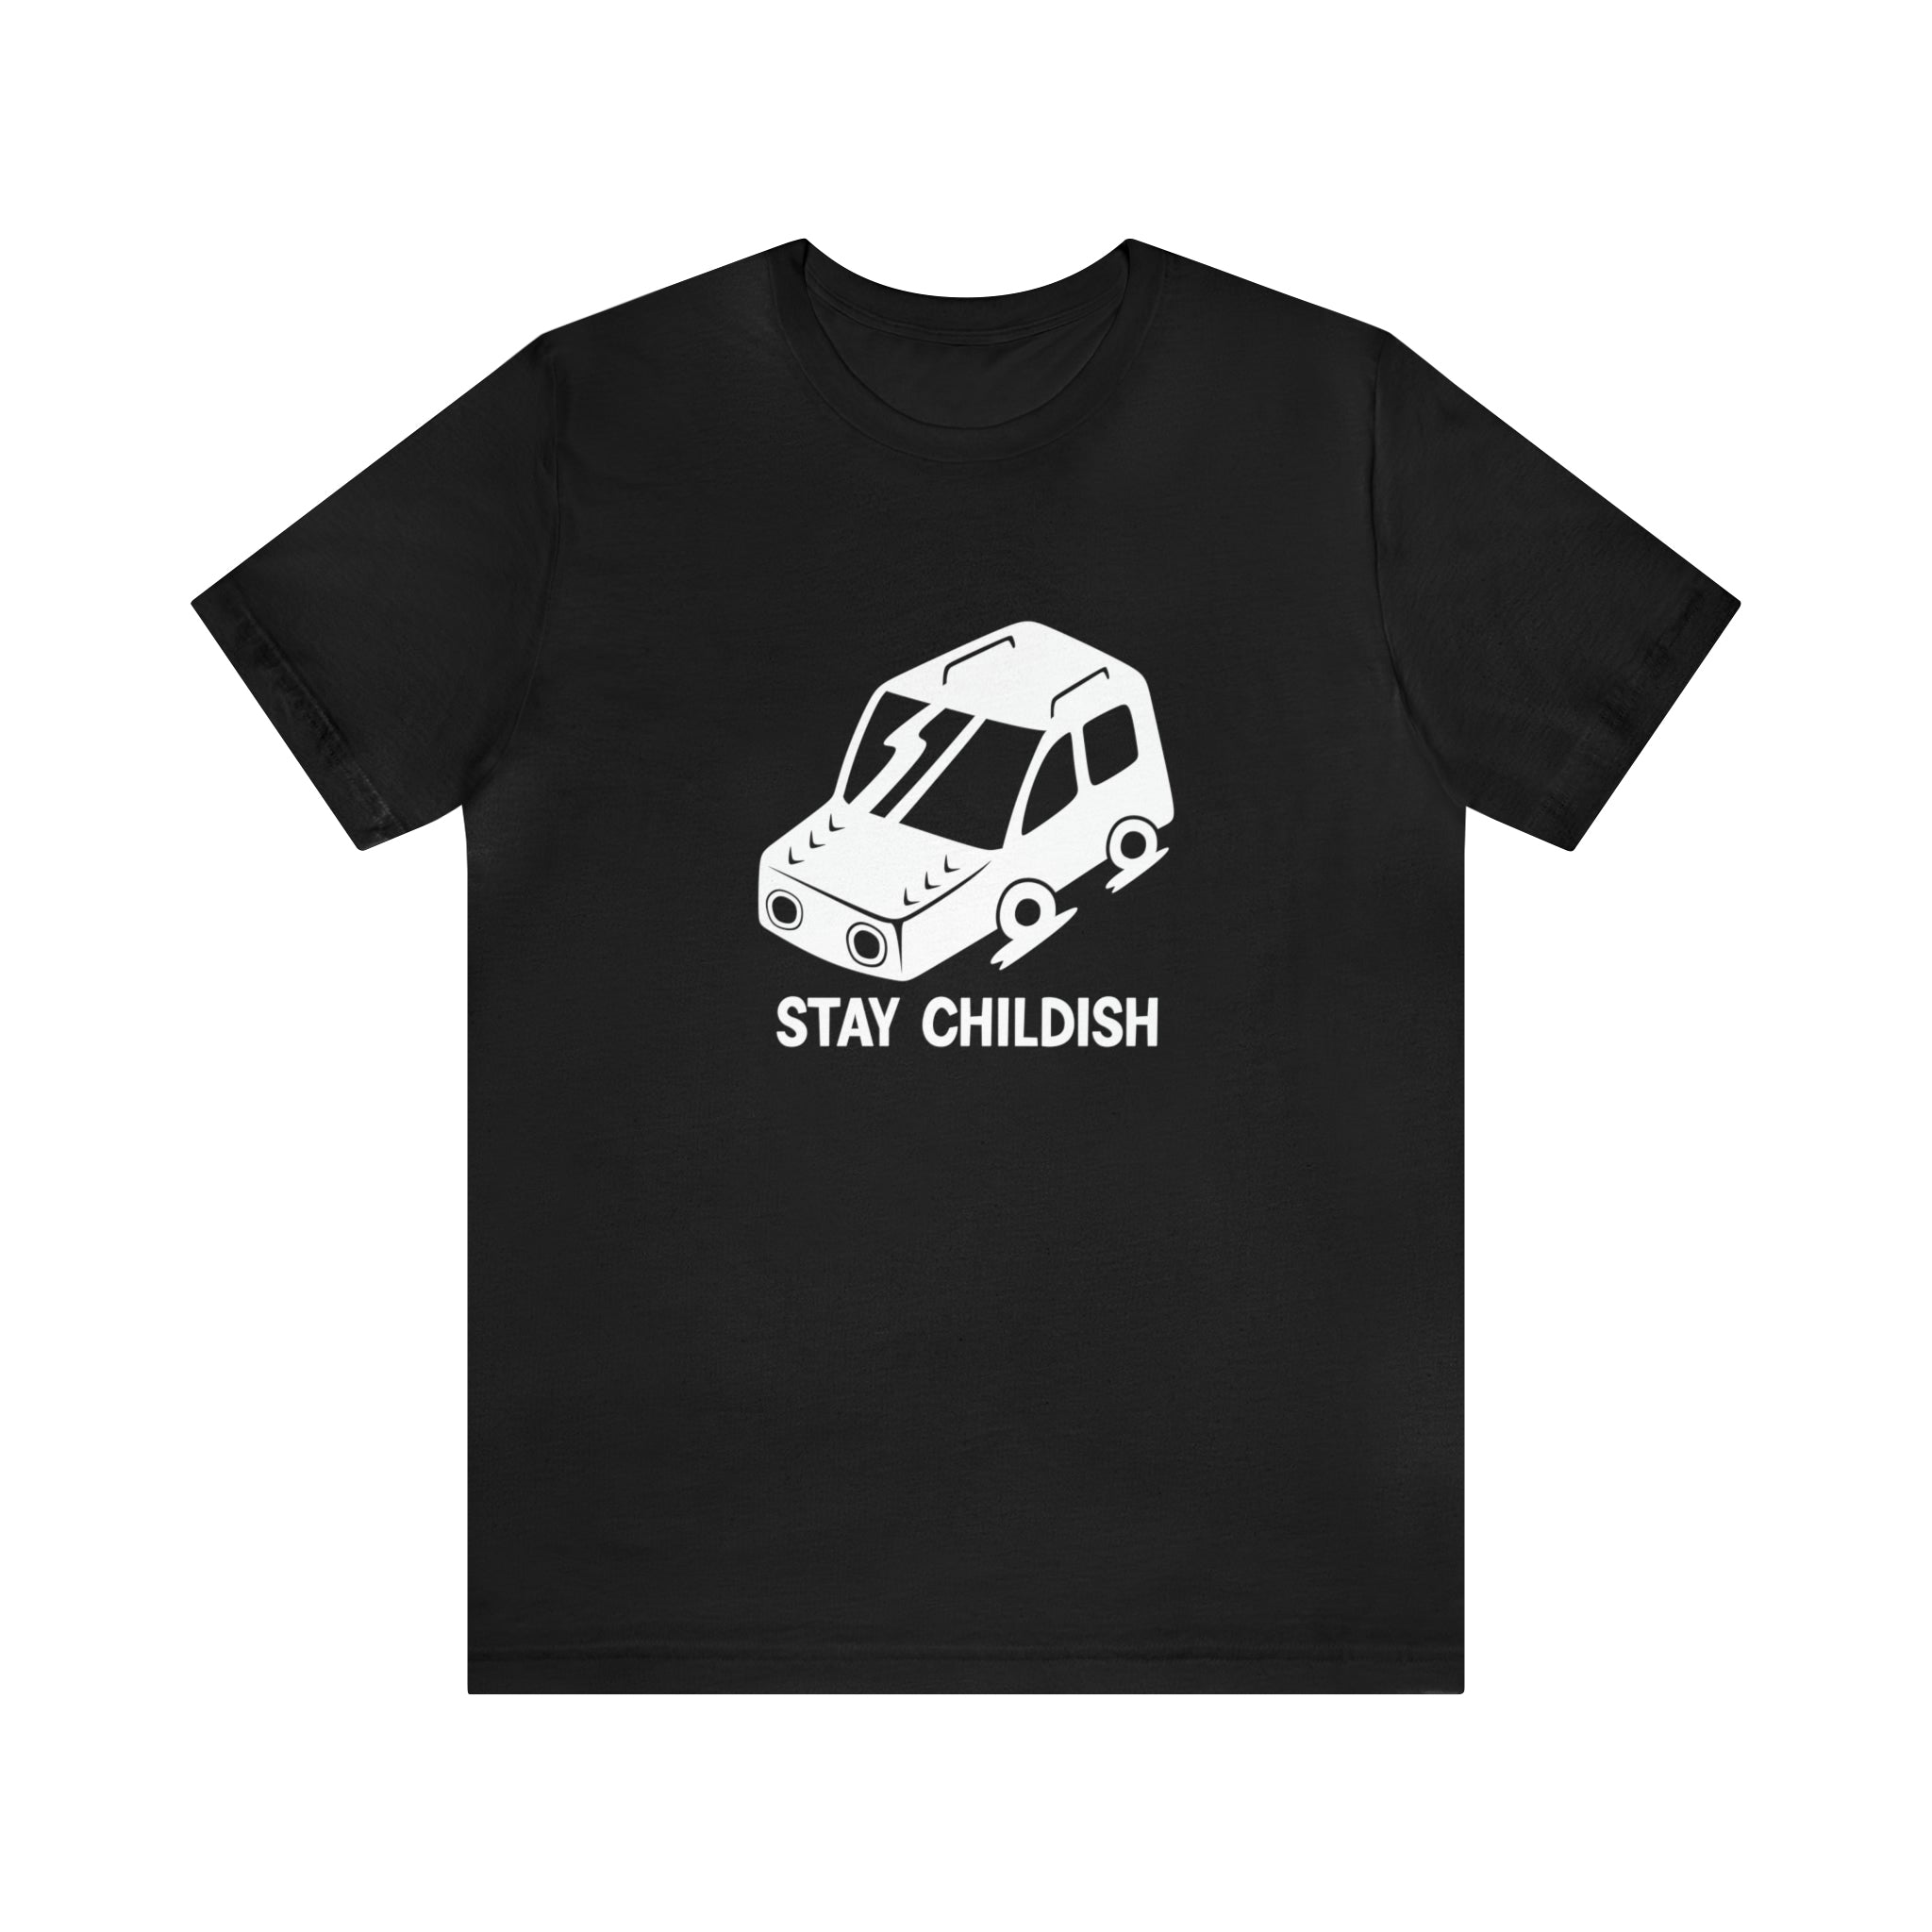 A black Stay Childish T-Shirt for those young at heart.